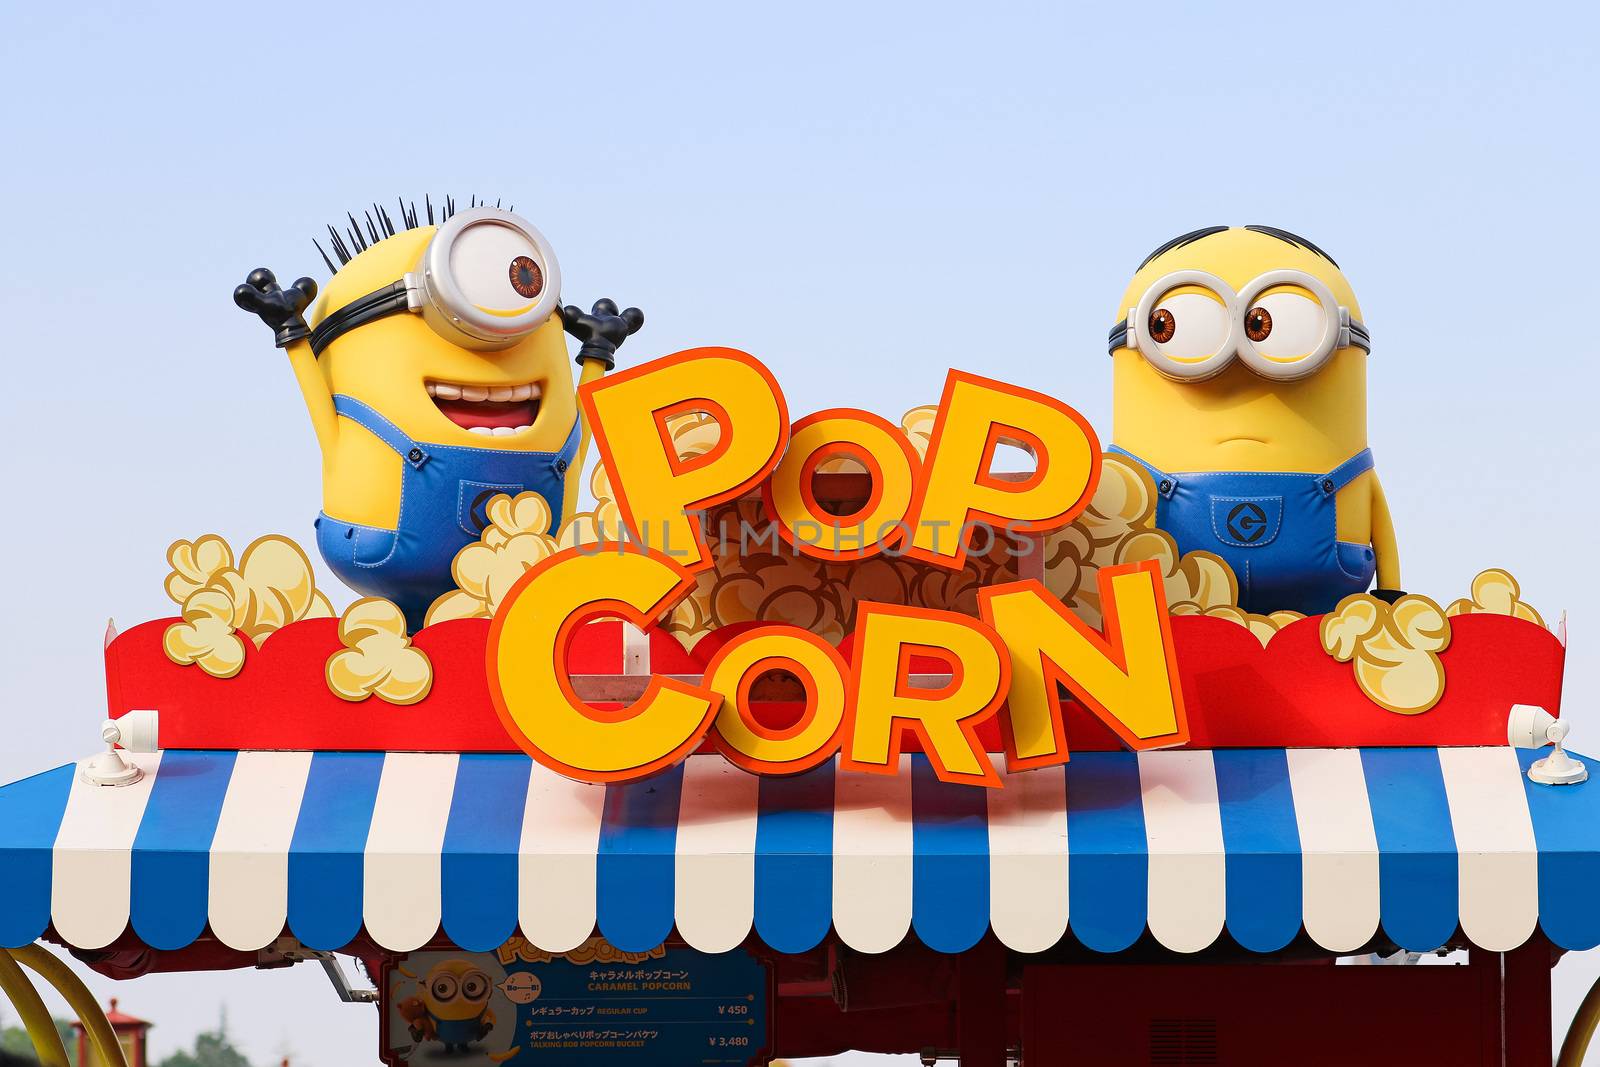 OSAKA, JAPAN - JAN 07, 2017 : Photo of "HAPPY MINION POP CORN SHOP", selling Minion Pop Corn, located in Universal Studios, Osaka, Japan. Minions are famous character from Despicable Me animation. by USA-TARO